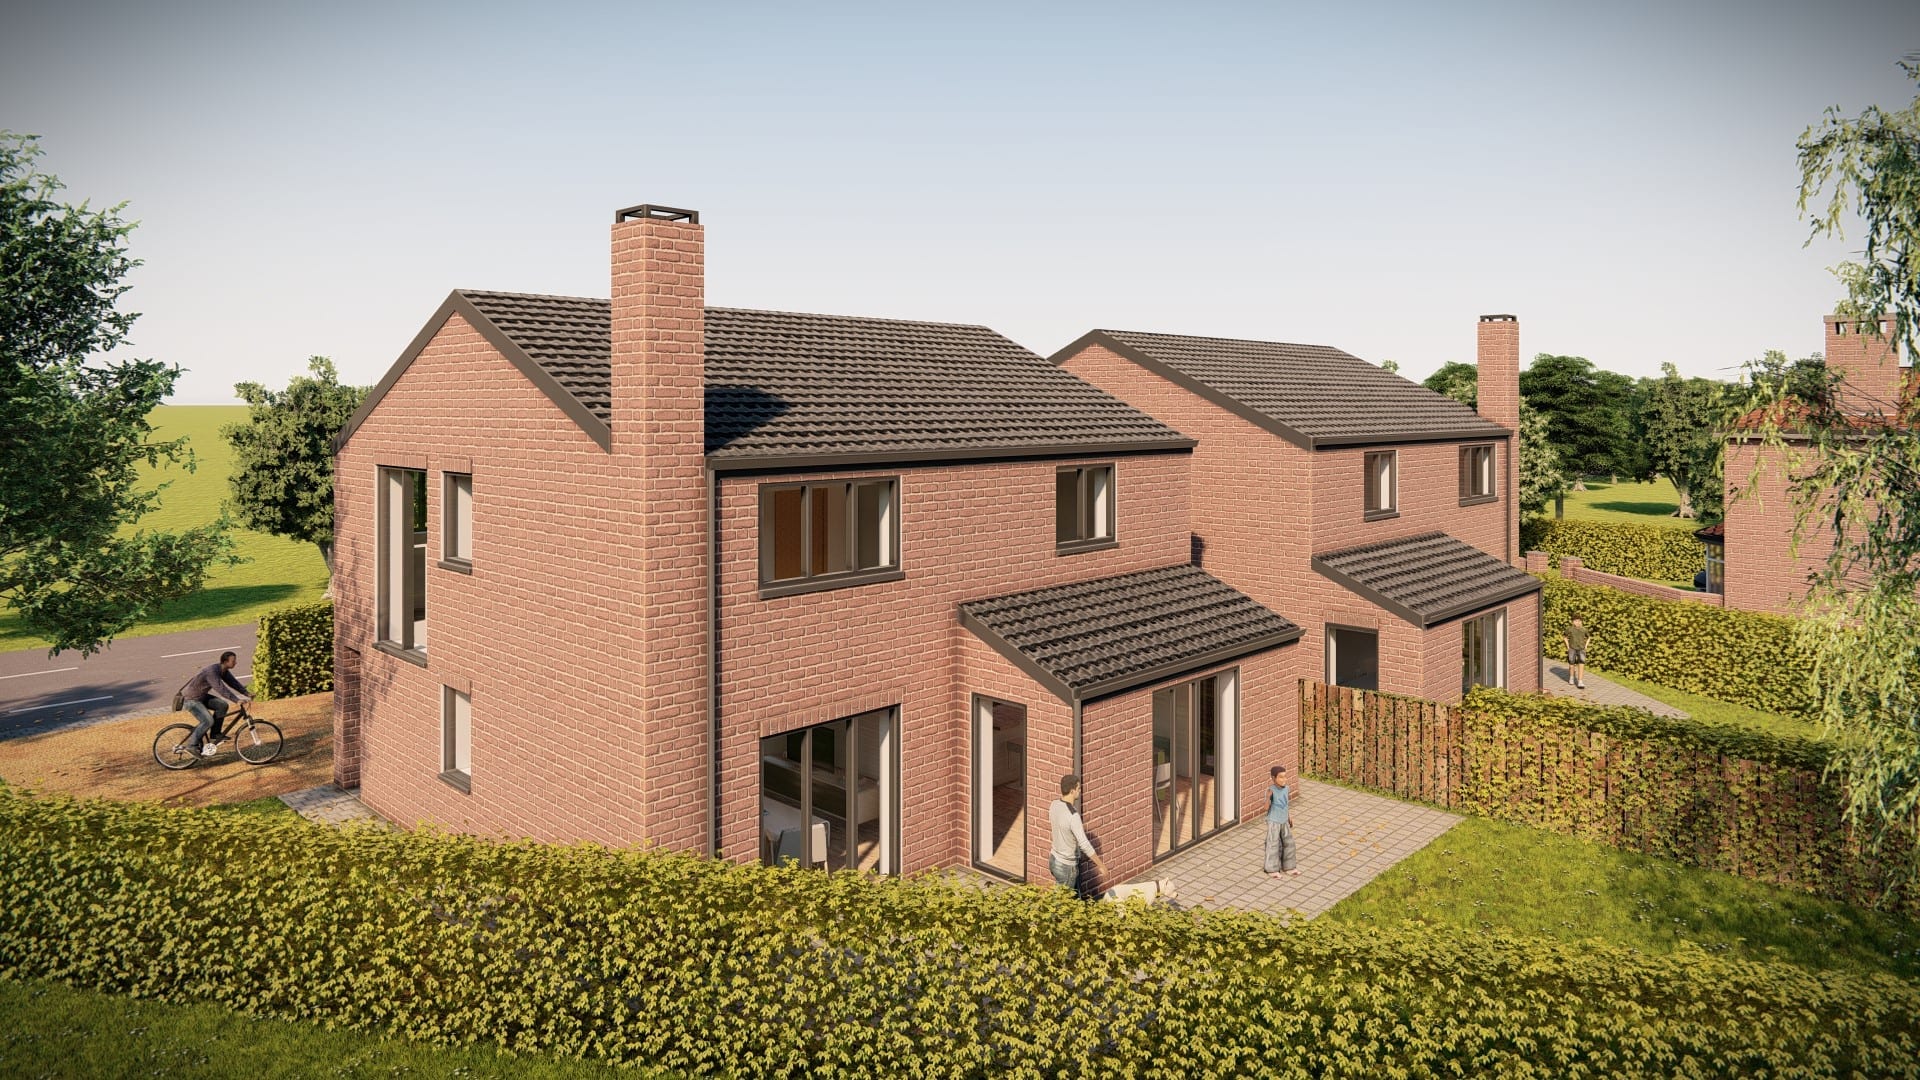 design concept for two rural dwellings holmes chapel